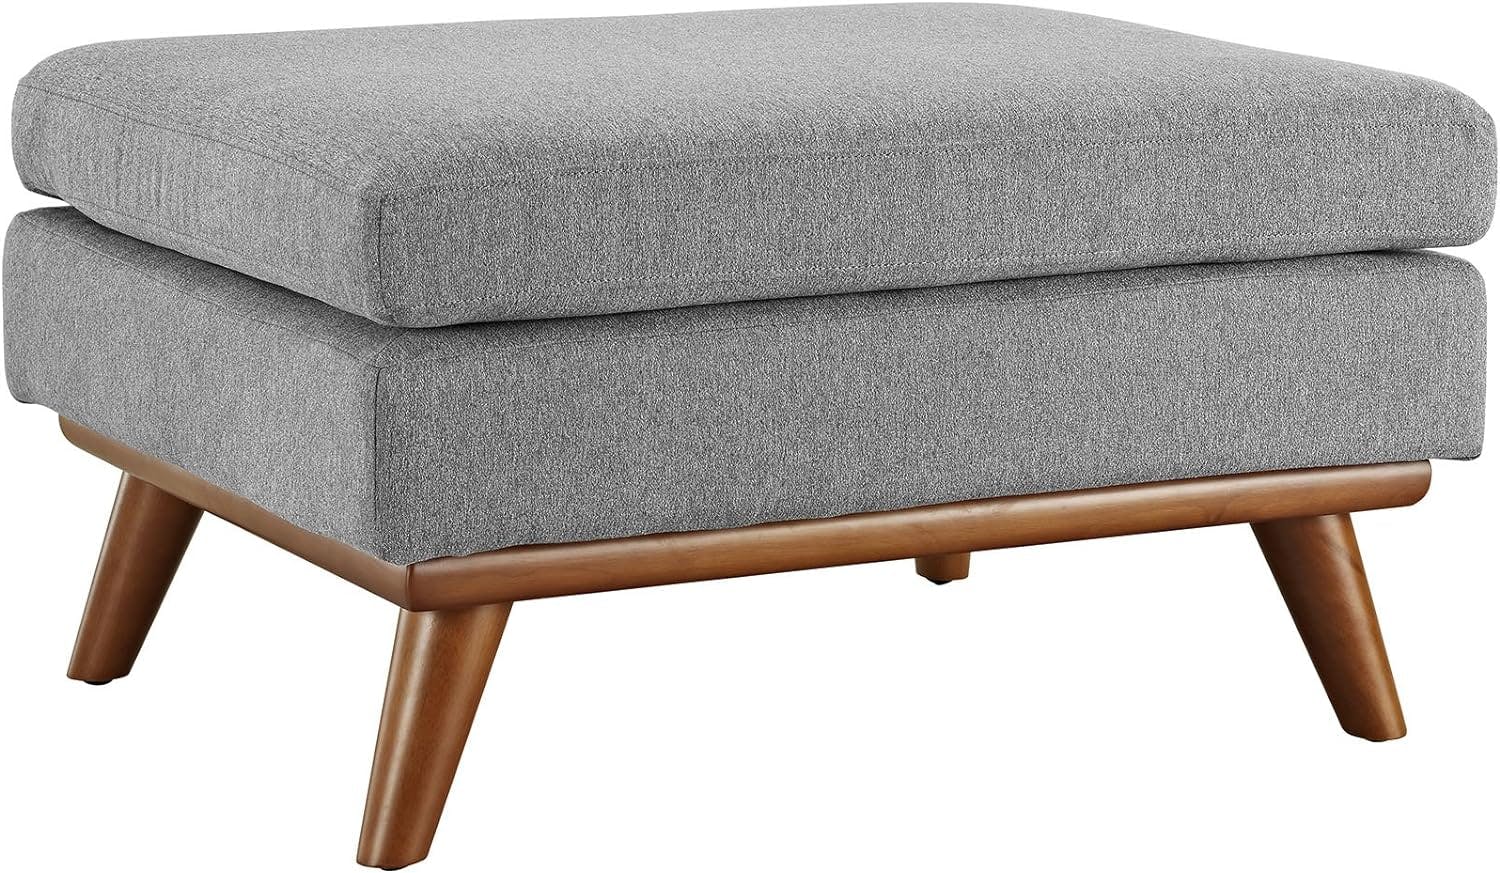 Expectation Gray Tufted Fabric Ottoman with Rubberwood Legs